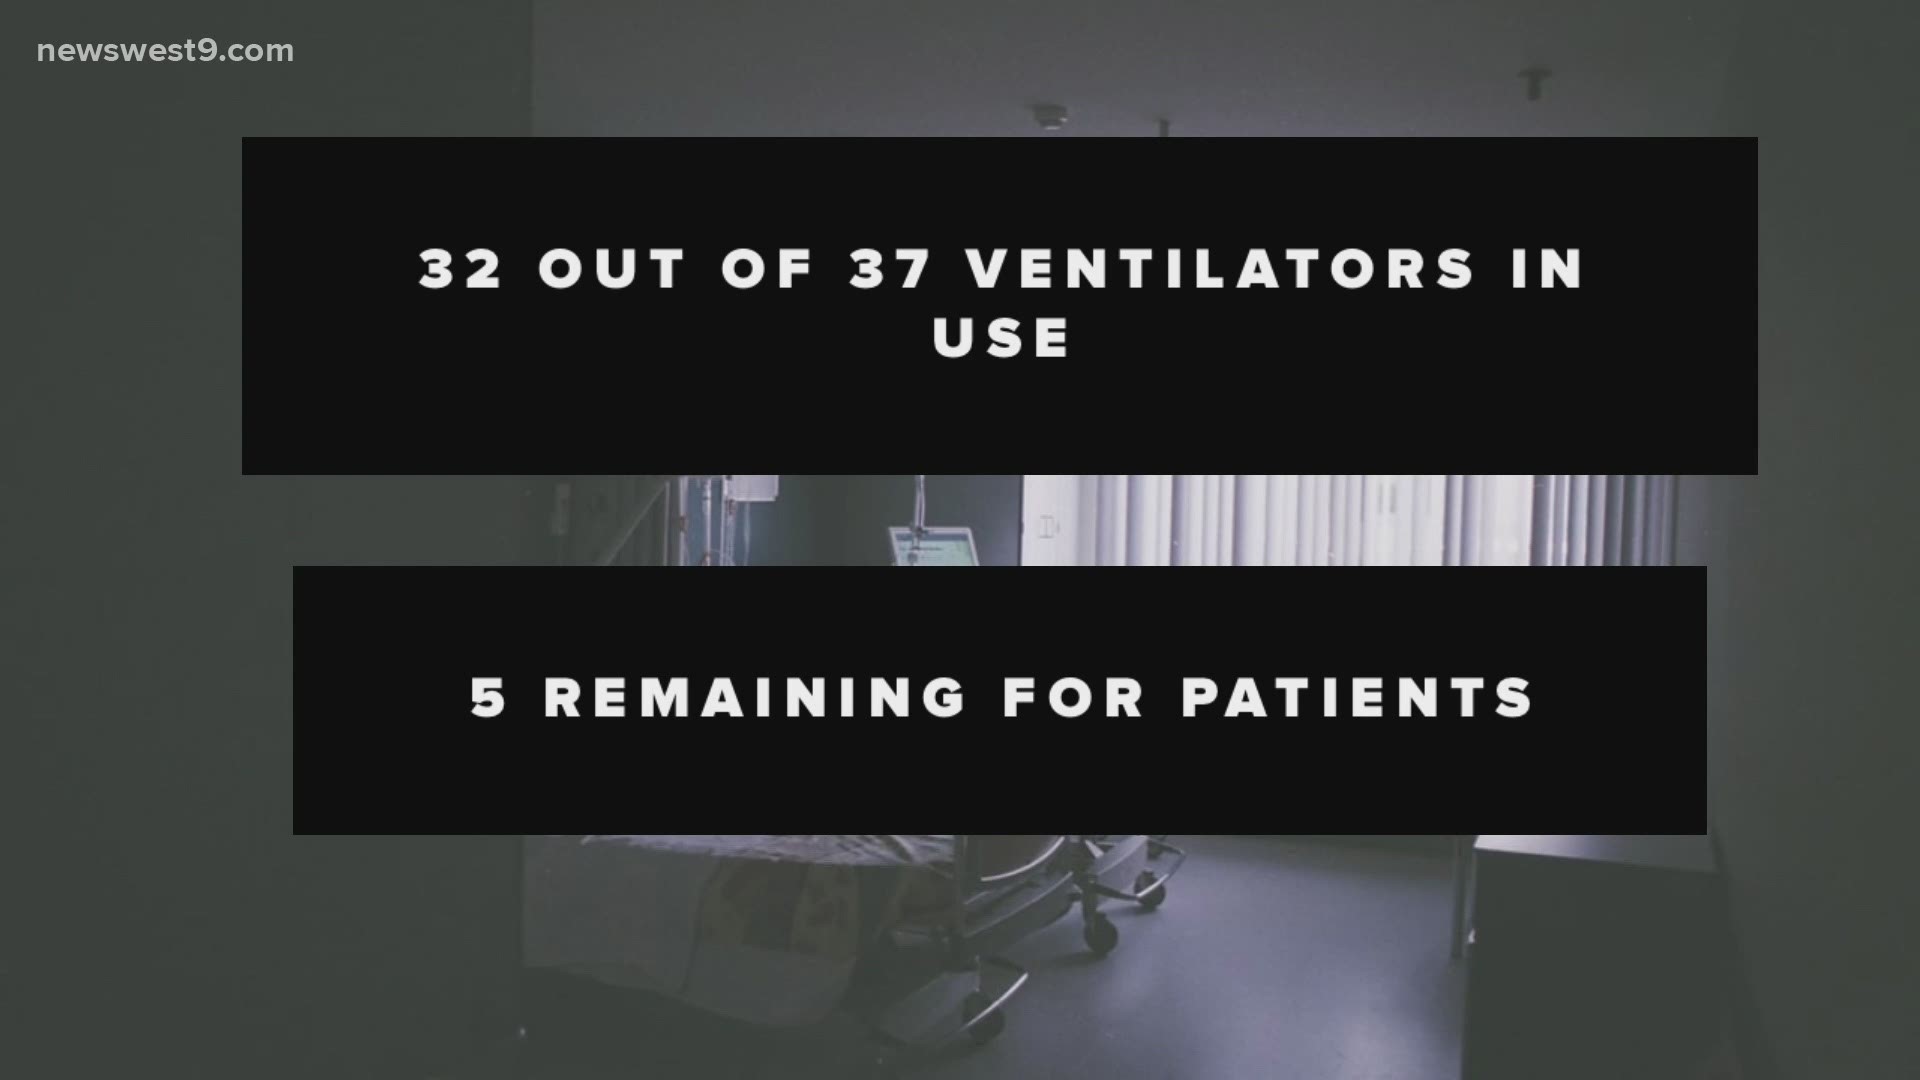 MCH has 32 of their 37 ventilators in use, leaving only five available for patients who might need them.